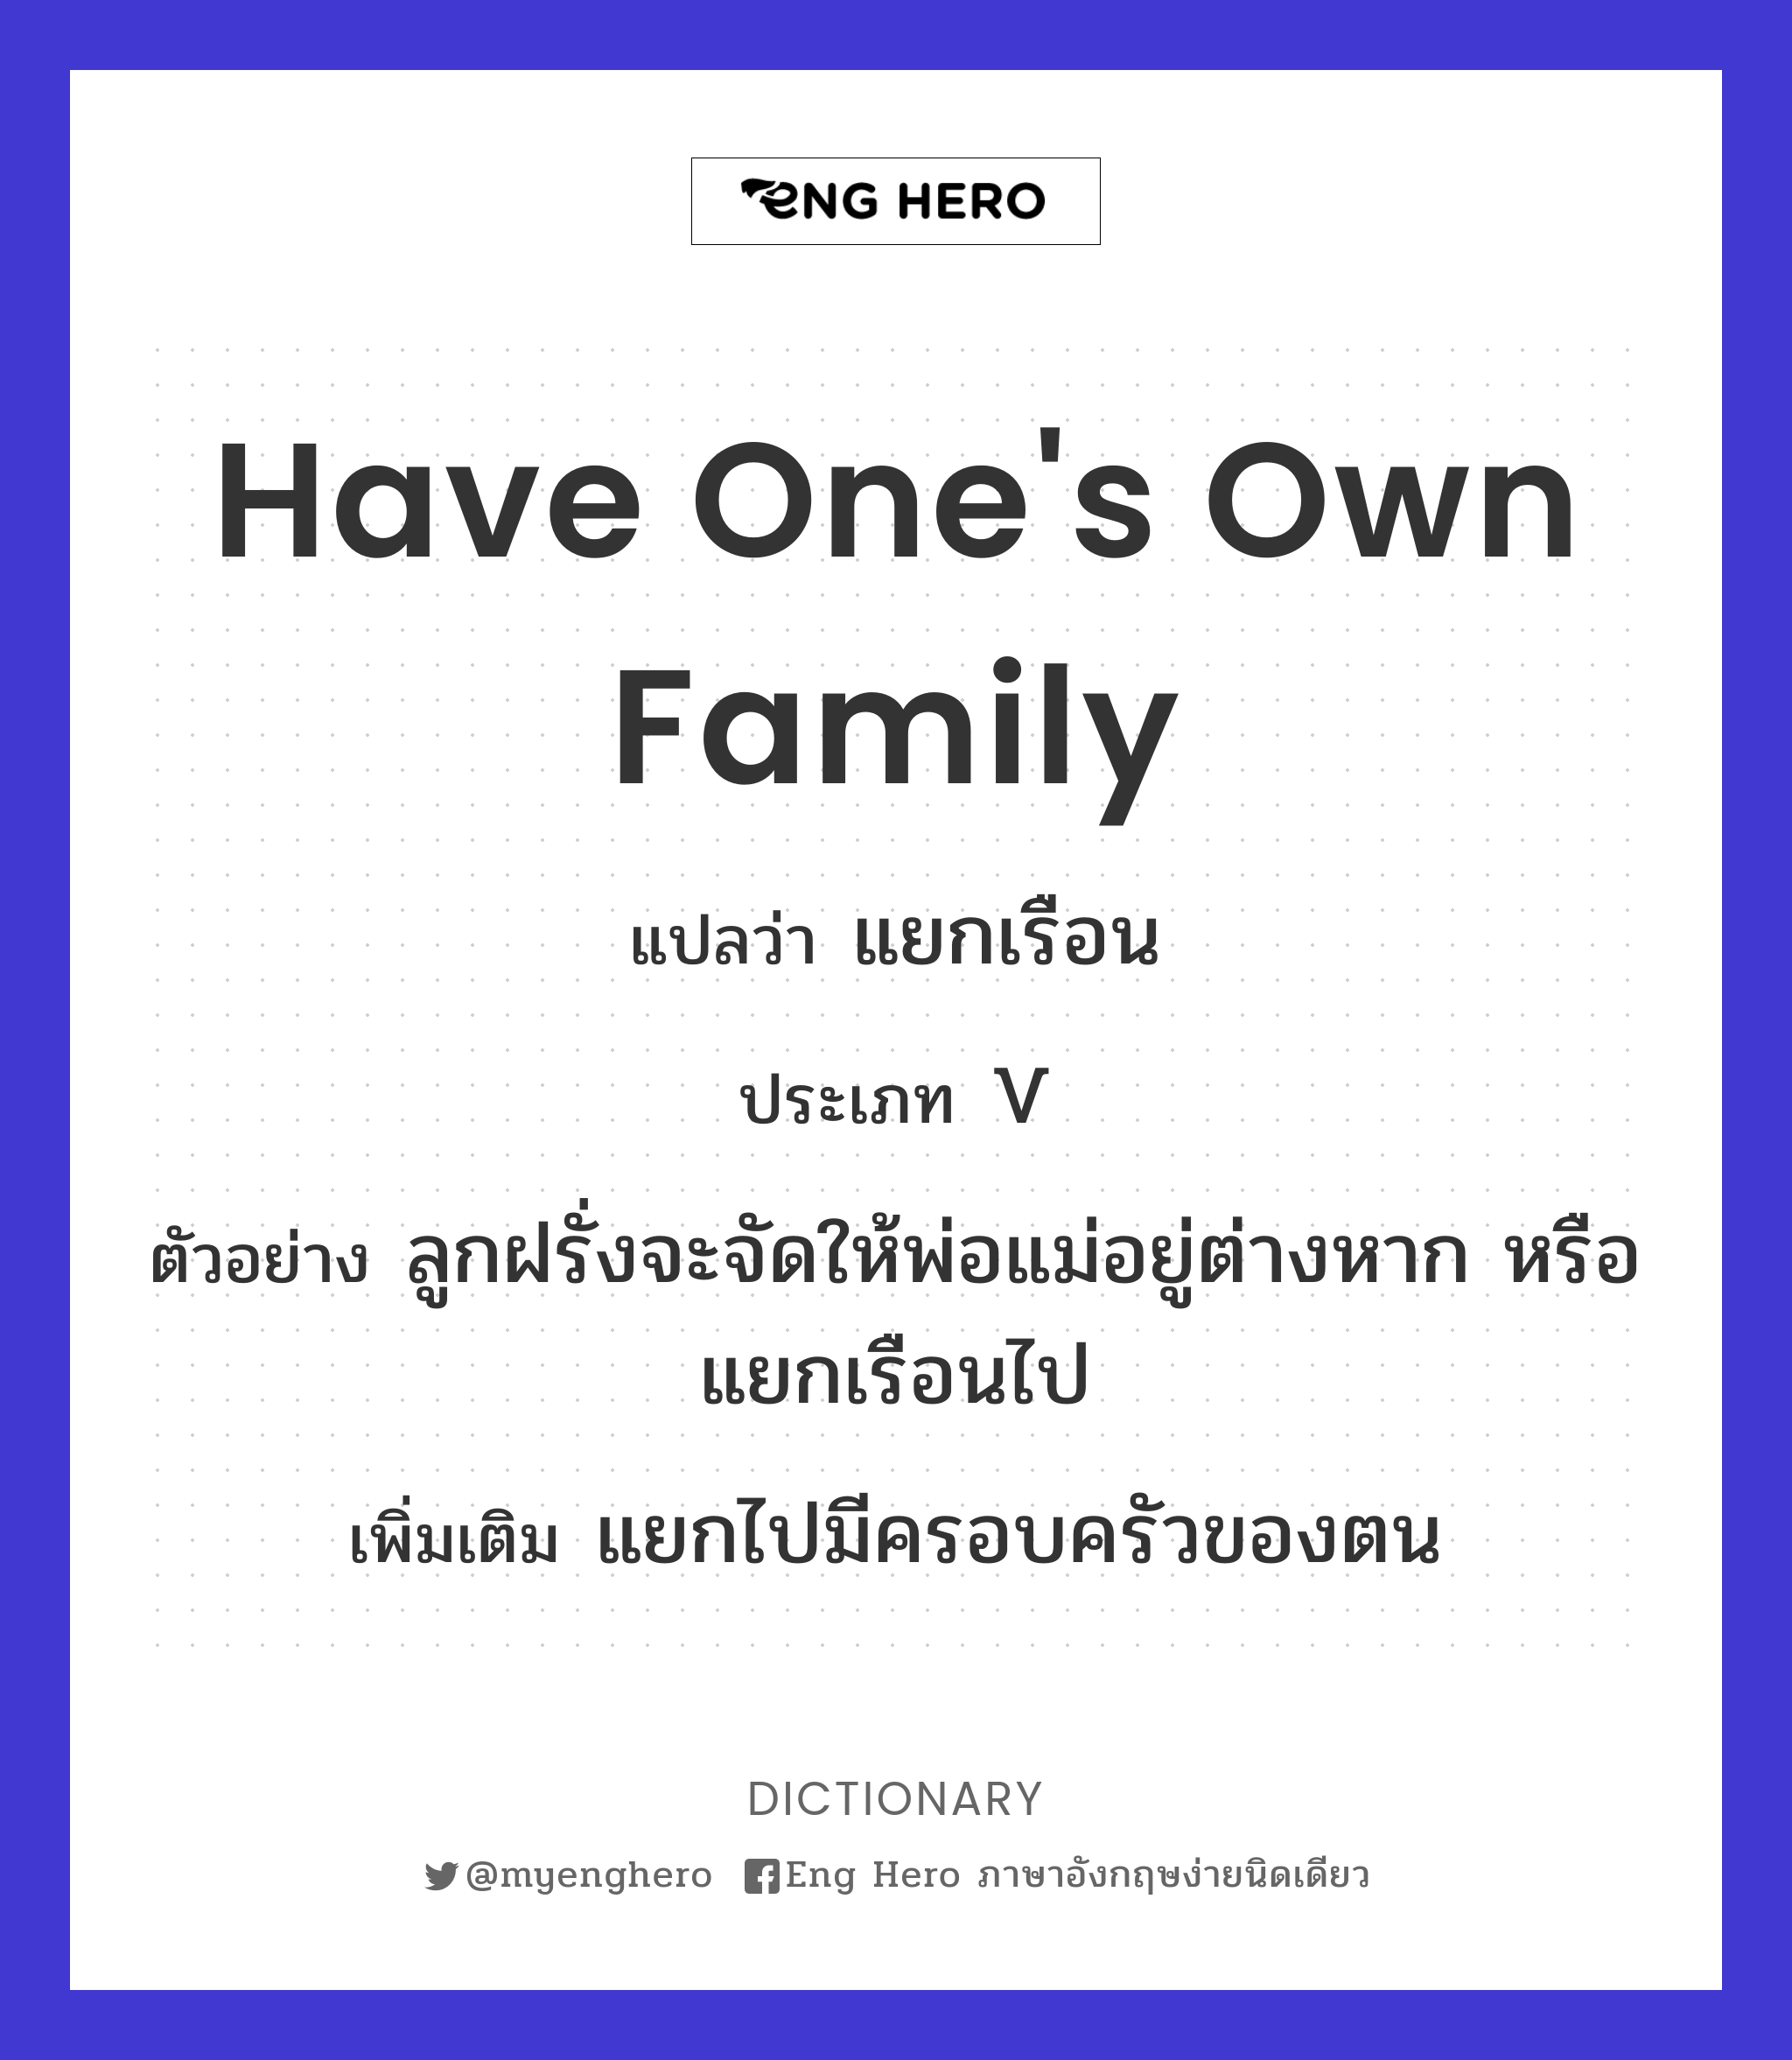 have one's own family